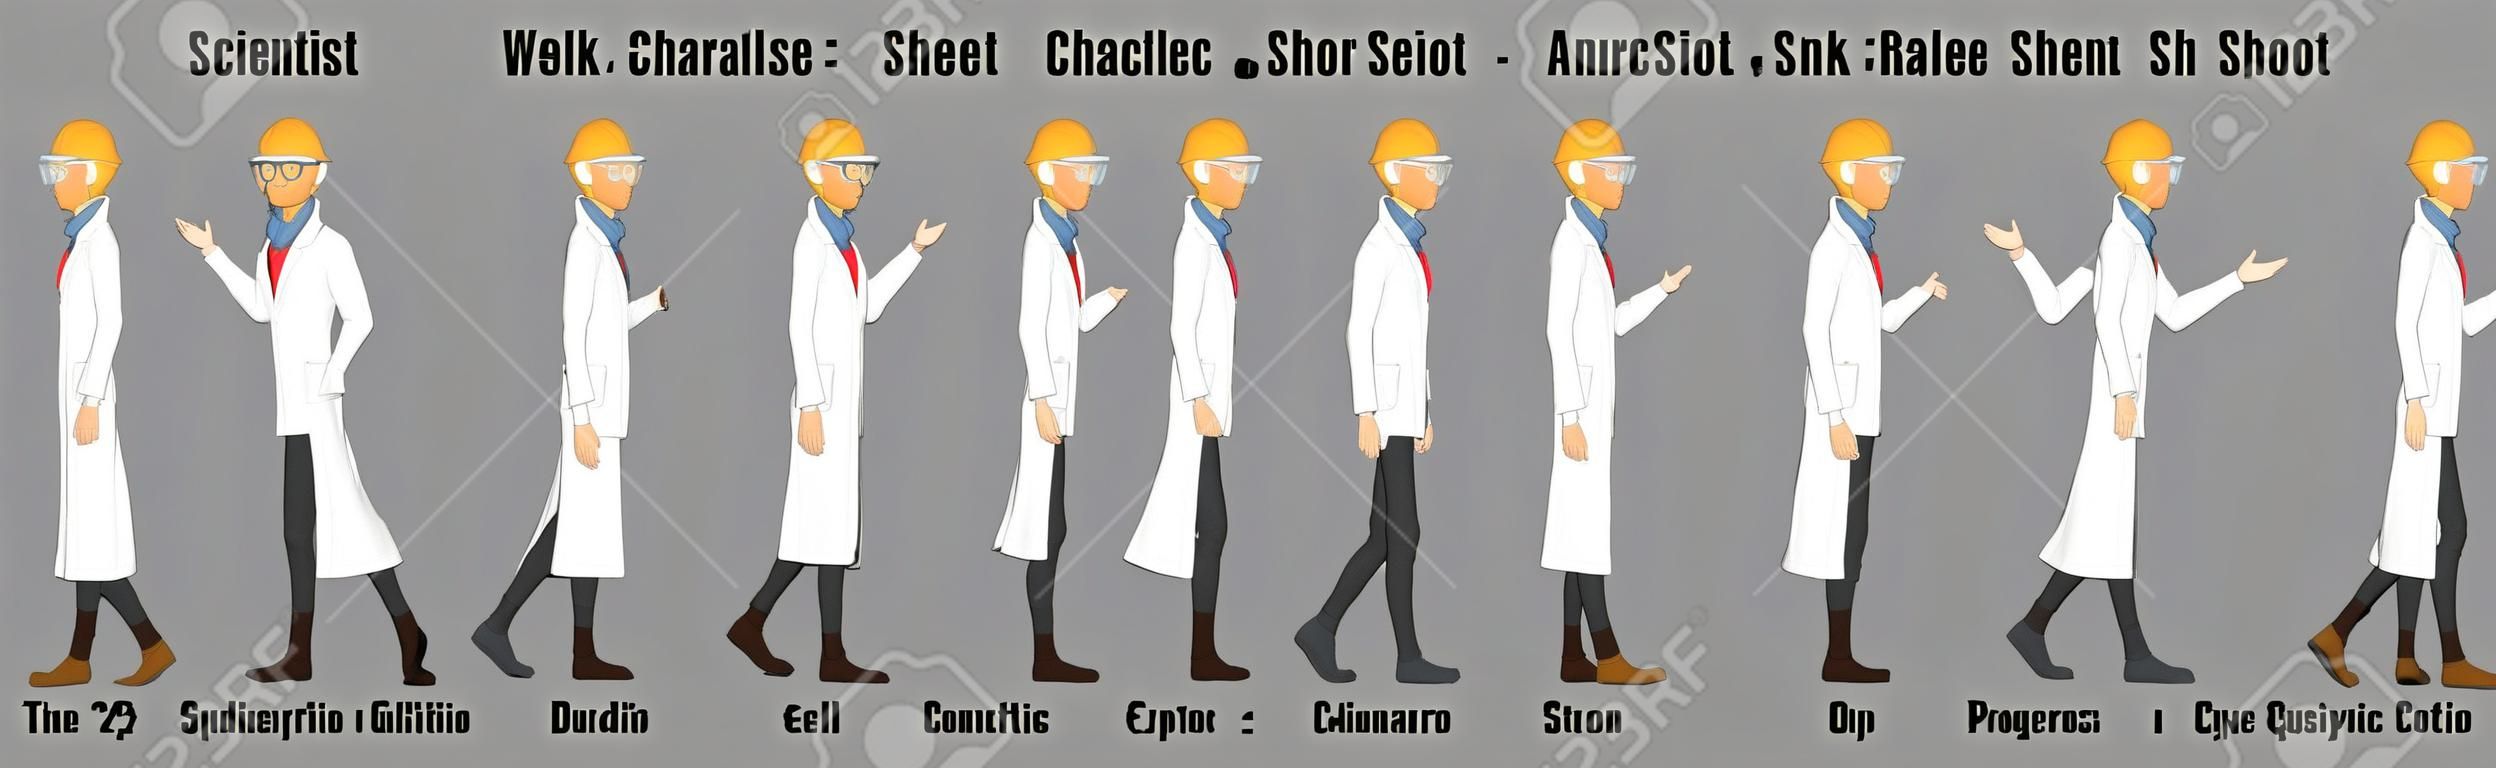 Scientist Character Model Sheet with Walk cycle Animation Sequence